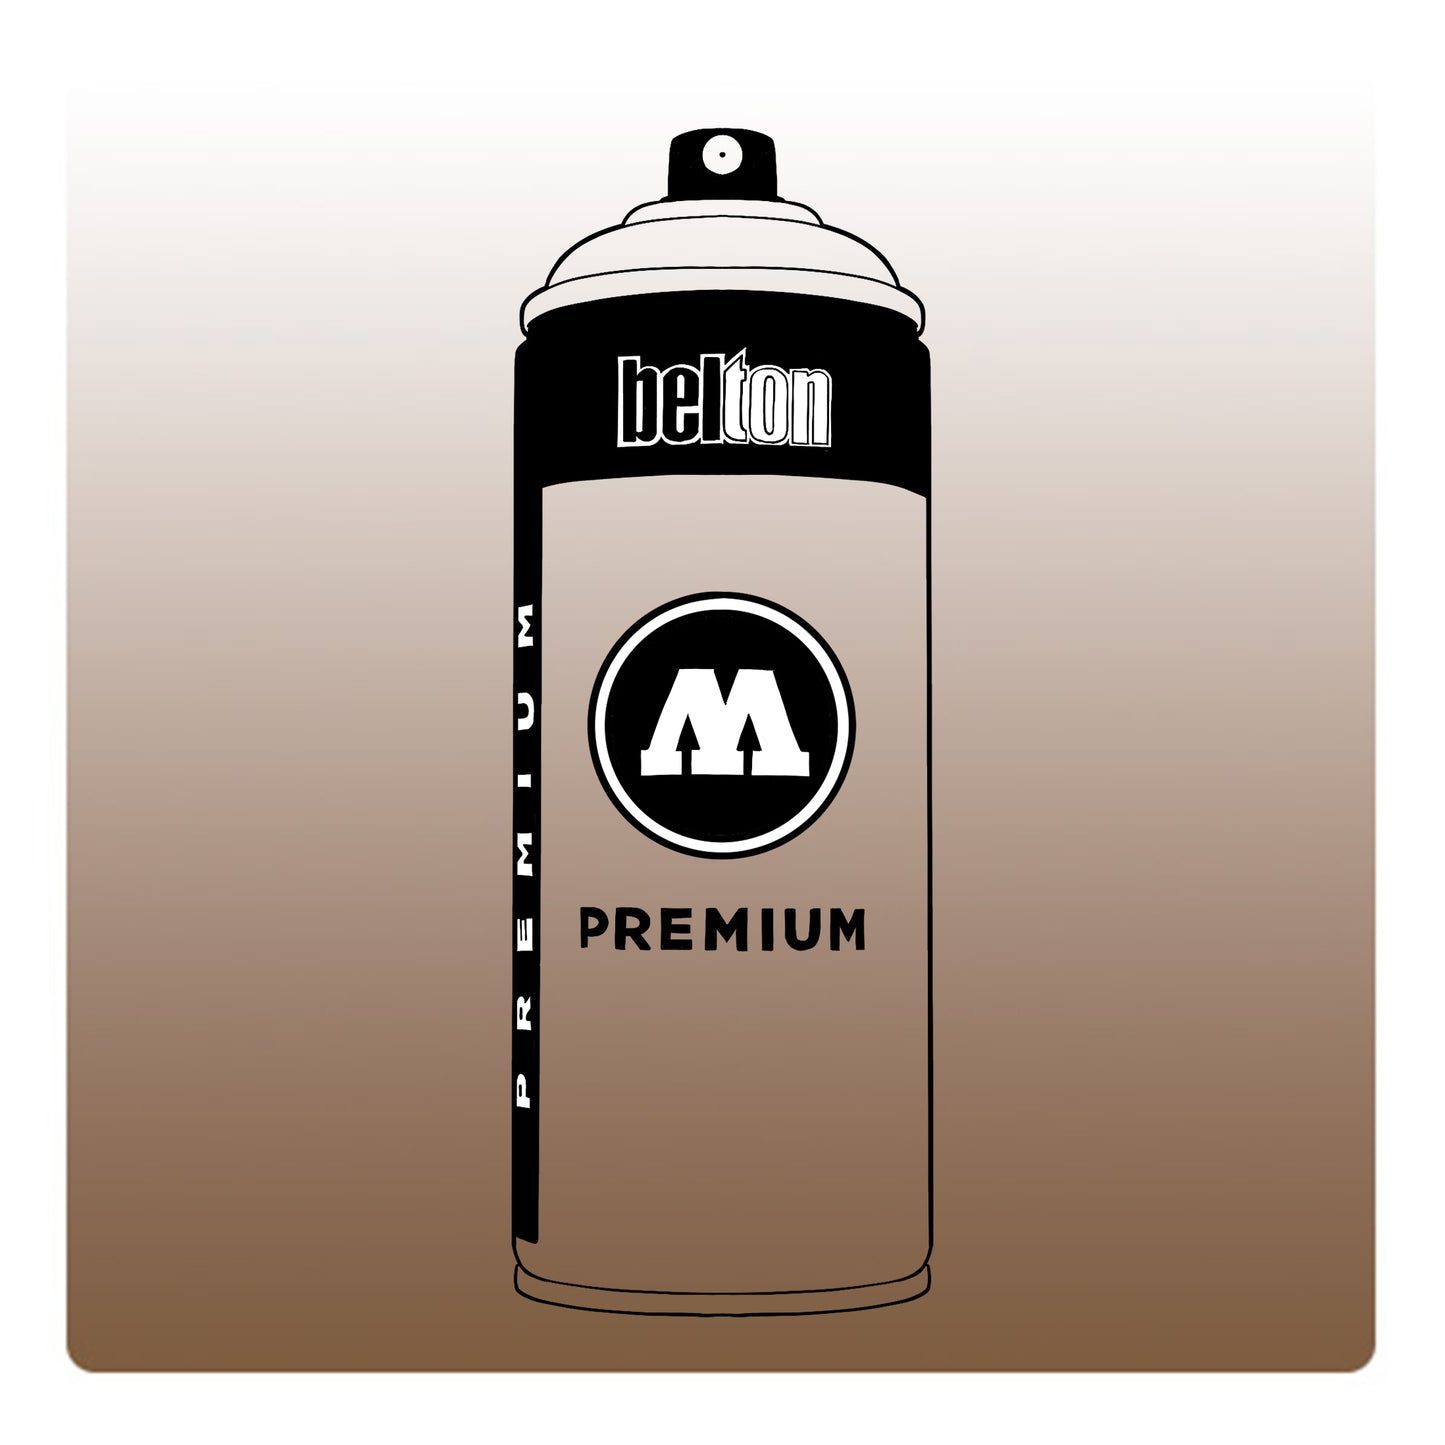 A line drawing of a spray paint can with a transparent, dark brown color swatch.